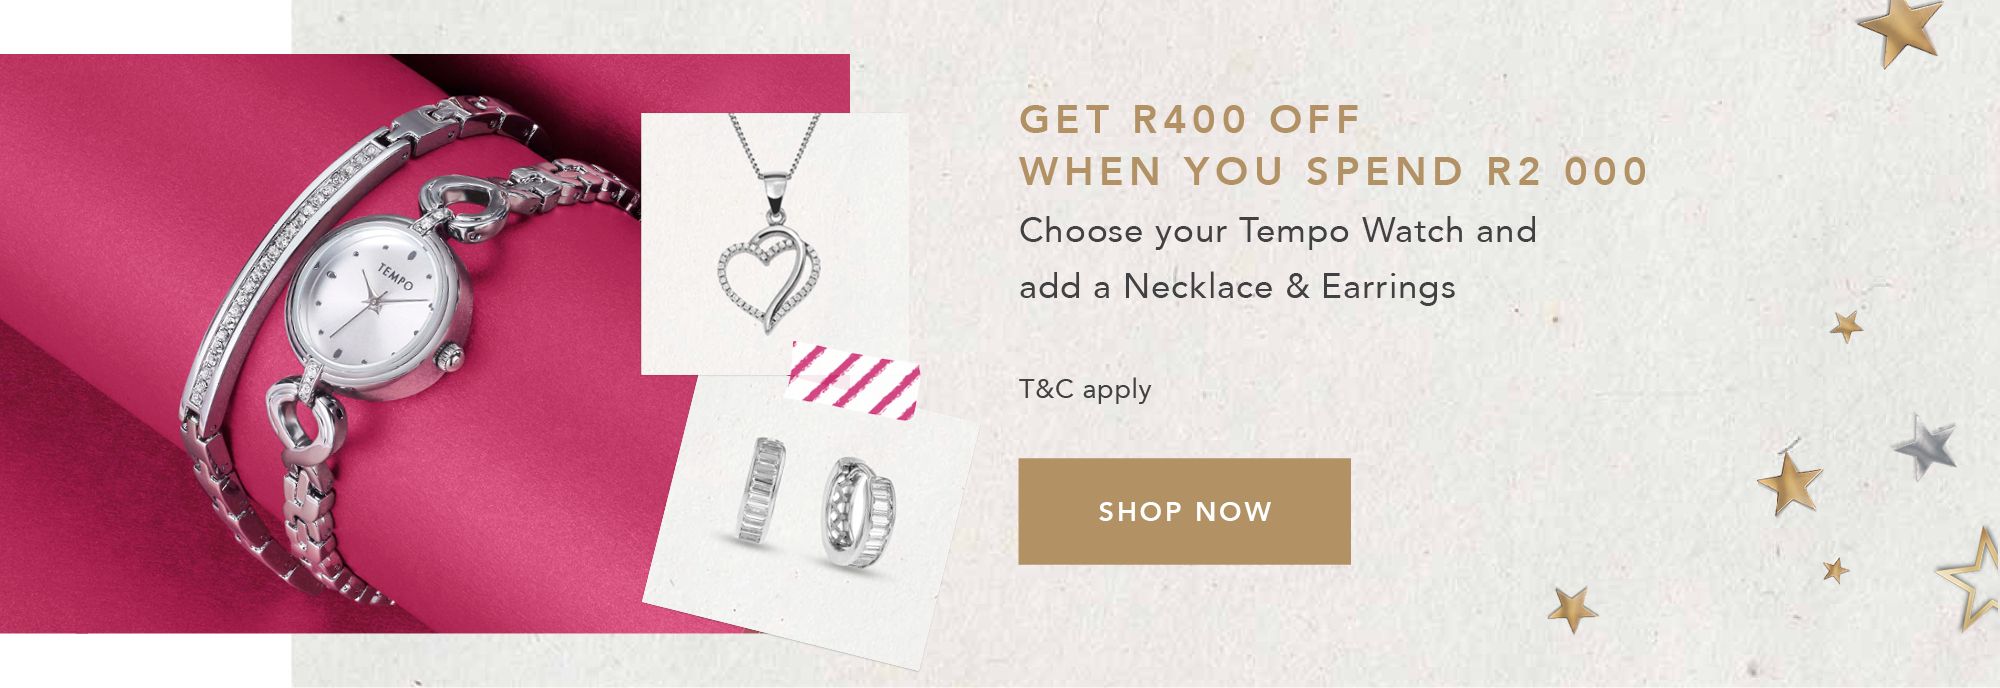 GET R400 OFF WHEN YOU SPEND R2 000 Choose your Tempo Watch and add a Necklace & Earrings